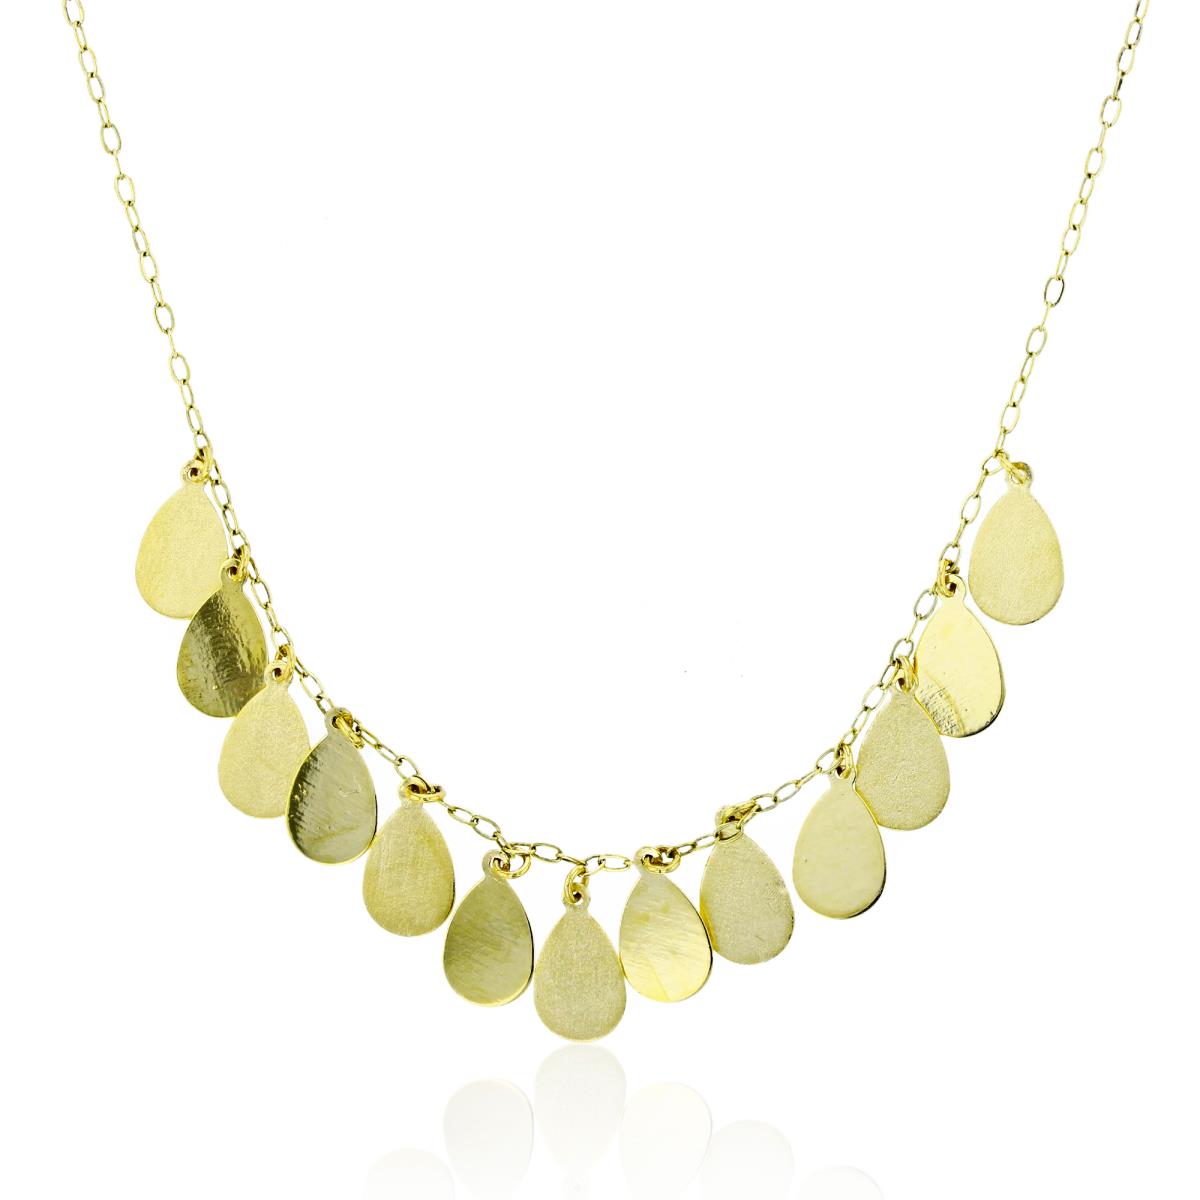 14K Yellow Gold Polished Pear Dangling 17" Necklace